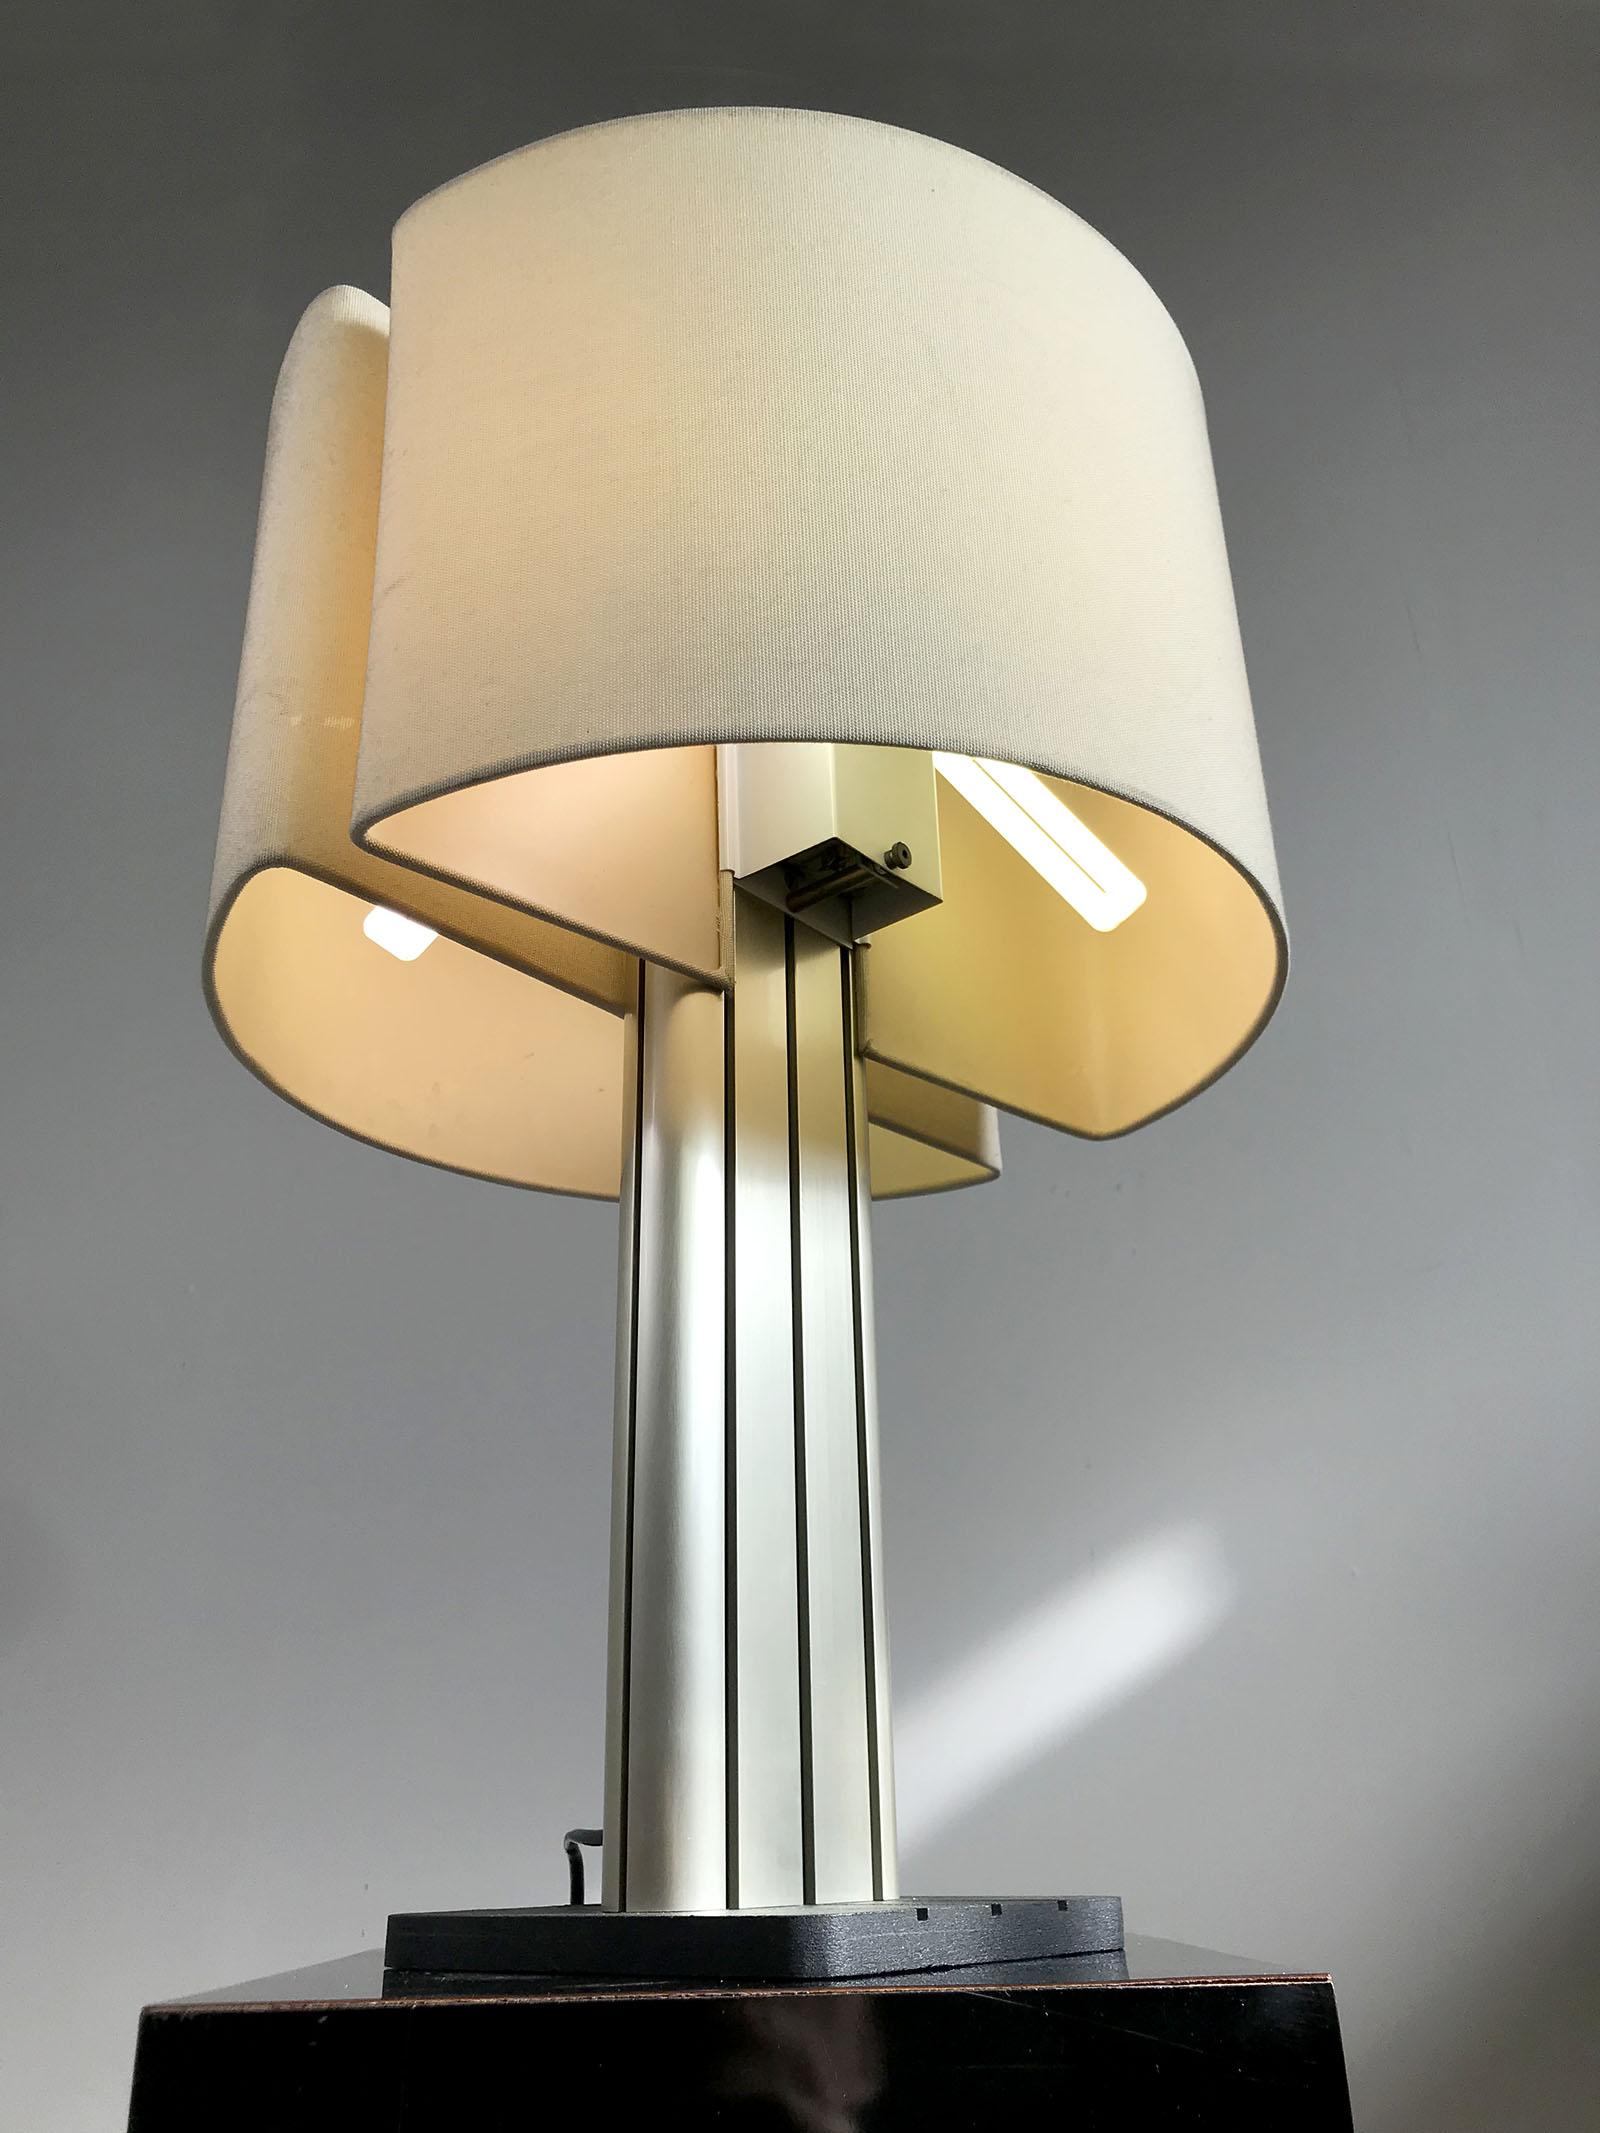 Large Strigam lamp by Jean-Pierre Vitrac for Verre et Lumière, France, 1983. Base in cast aluminum, barrel in anodized aluminum.
Rare version with double lampshade, lighting provided by 4 fluorescent lamps.
Very good original condition.